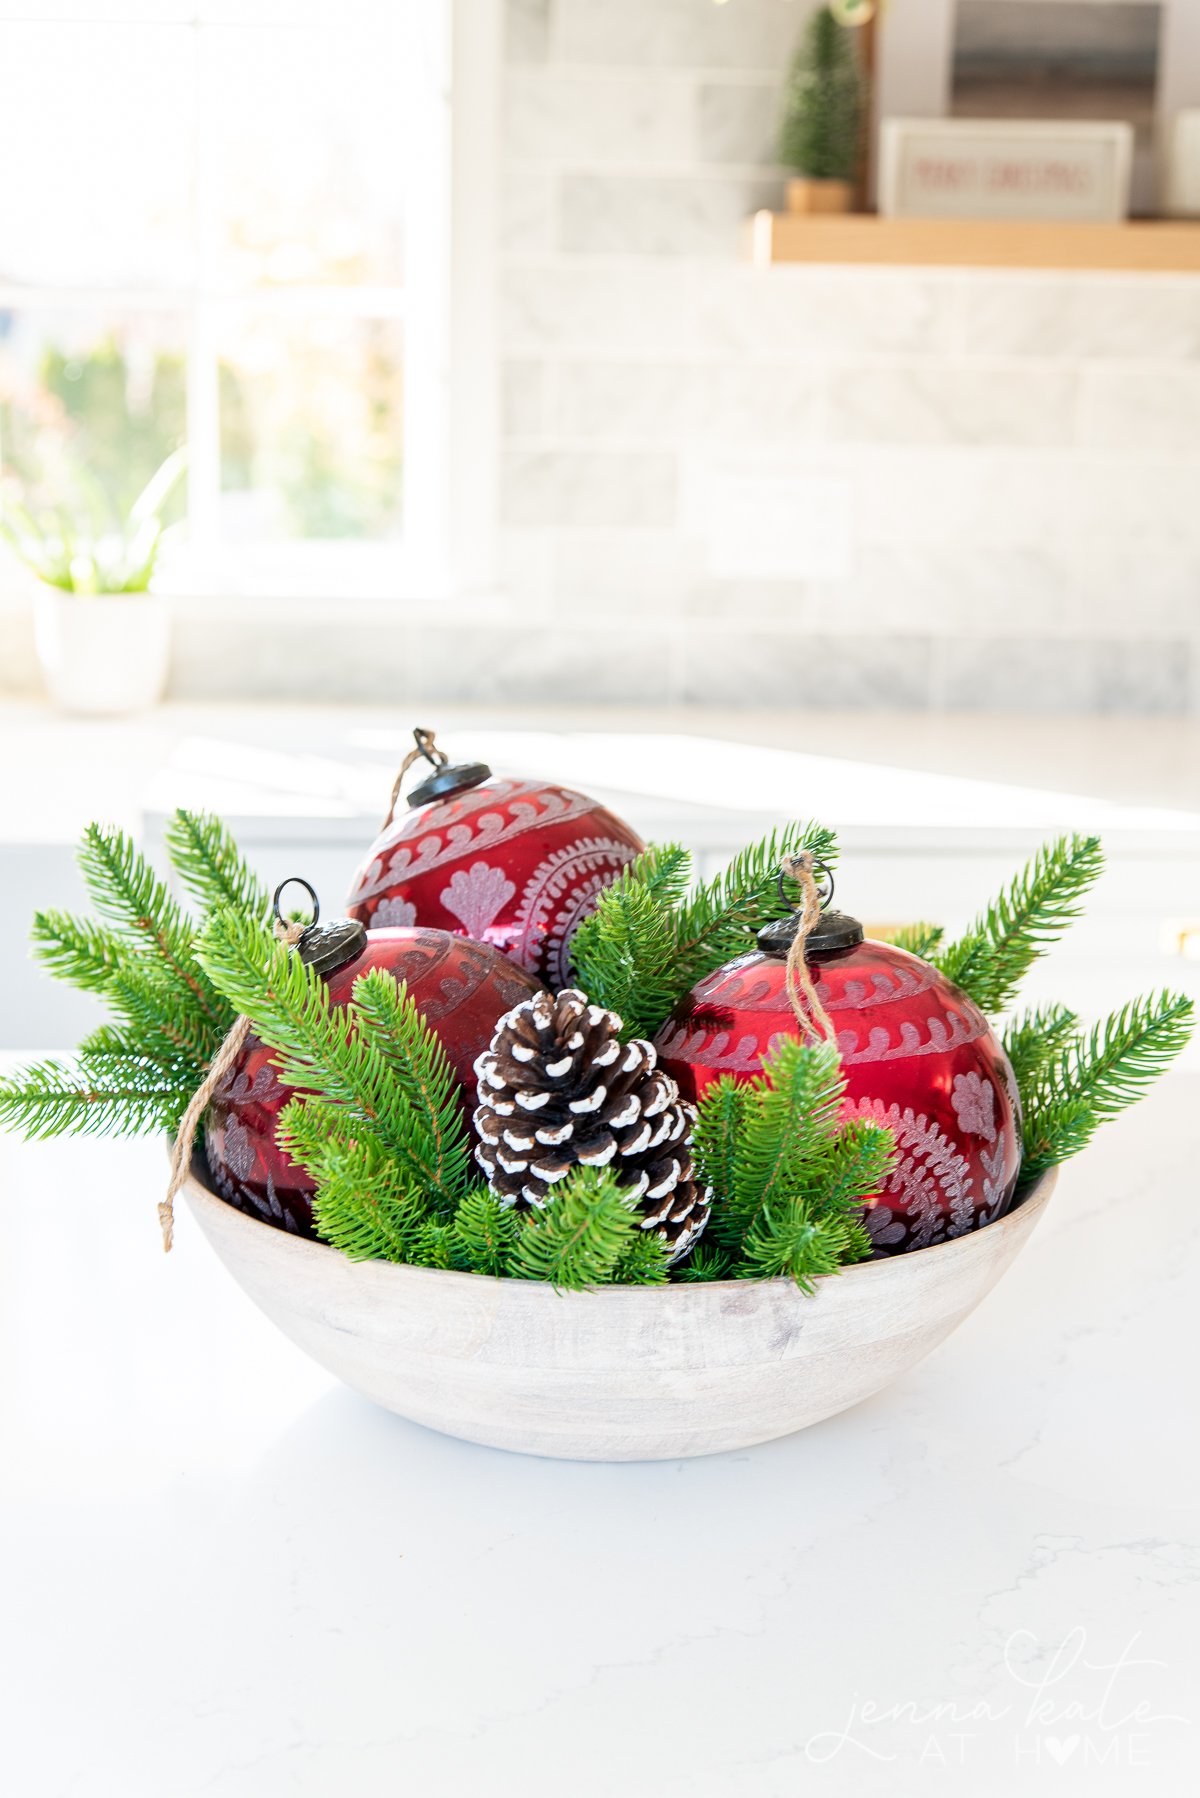 bowl of ornaments and greenery on kitchen island